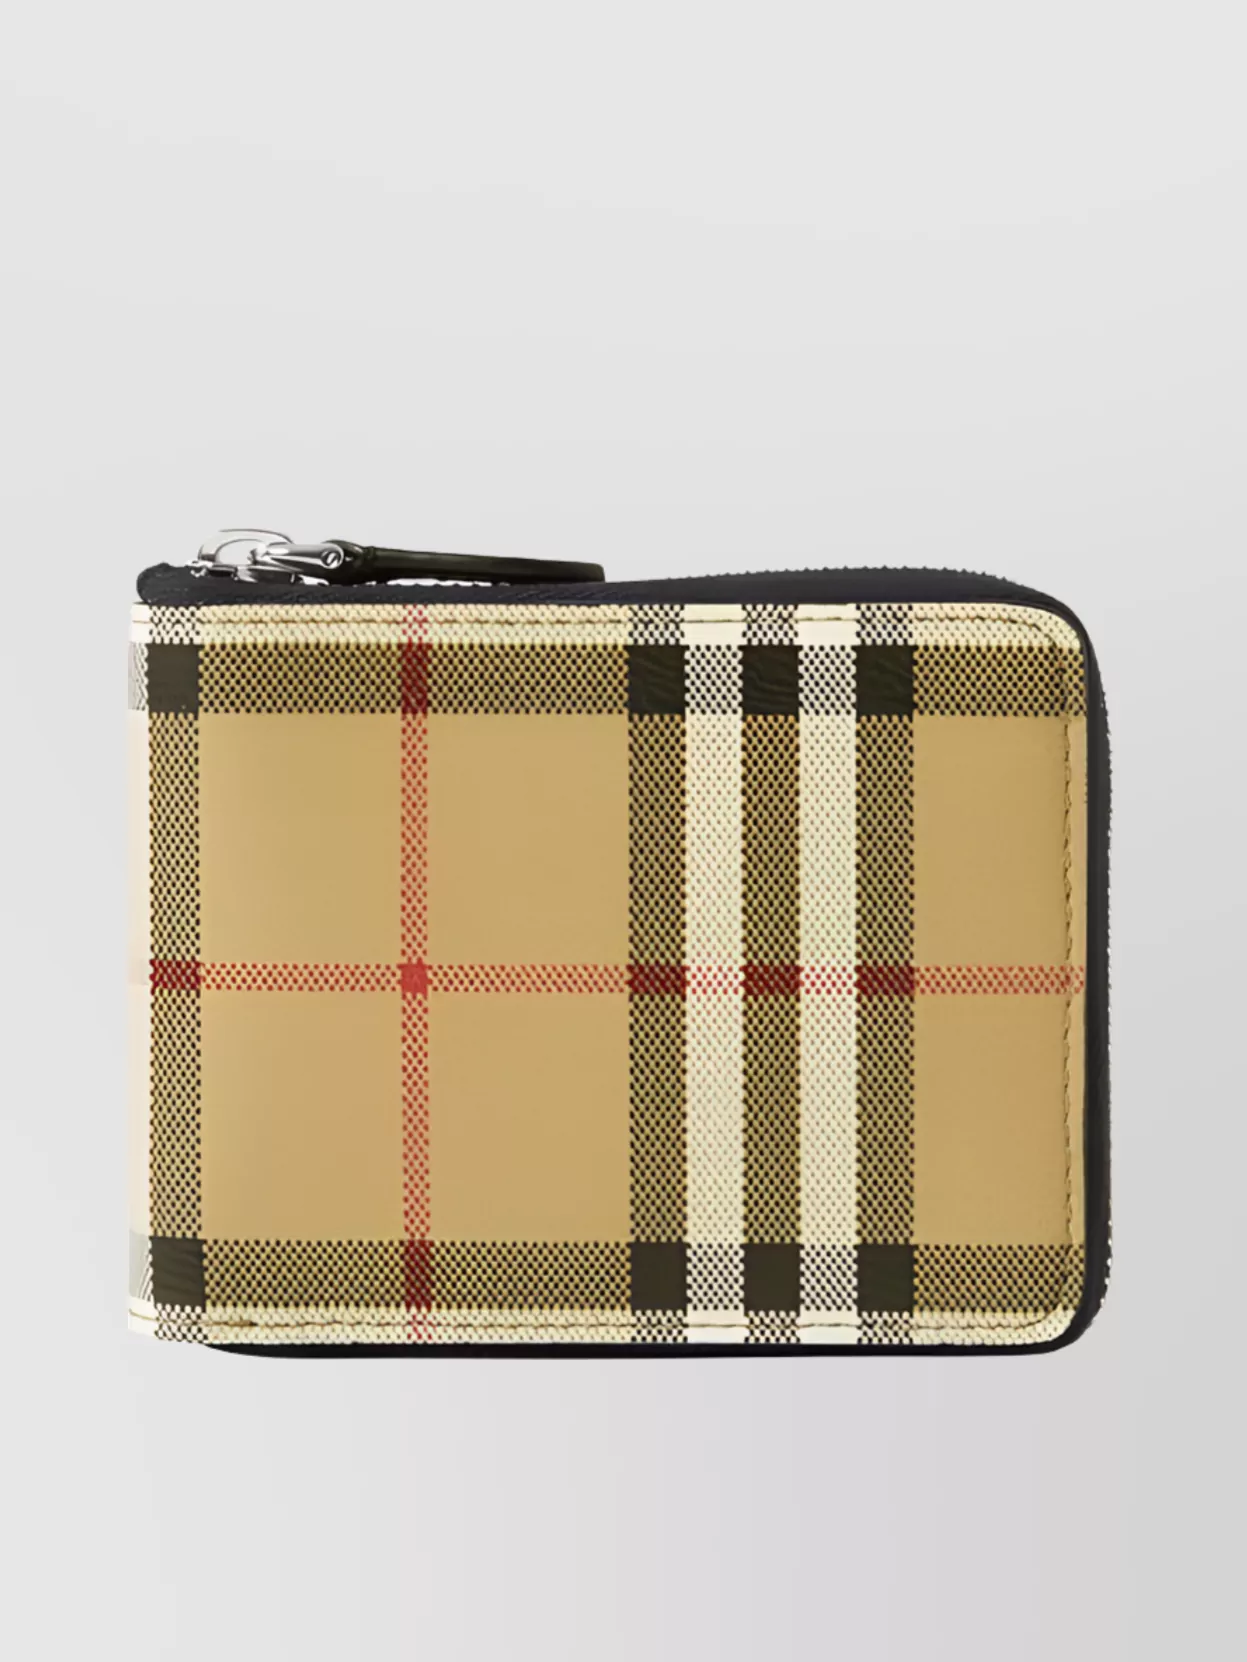 Burberry Check-print All-around Zip Wallet In A7026 - Archive Beige